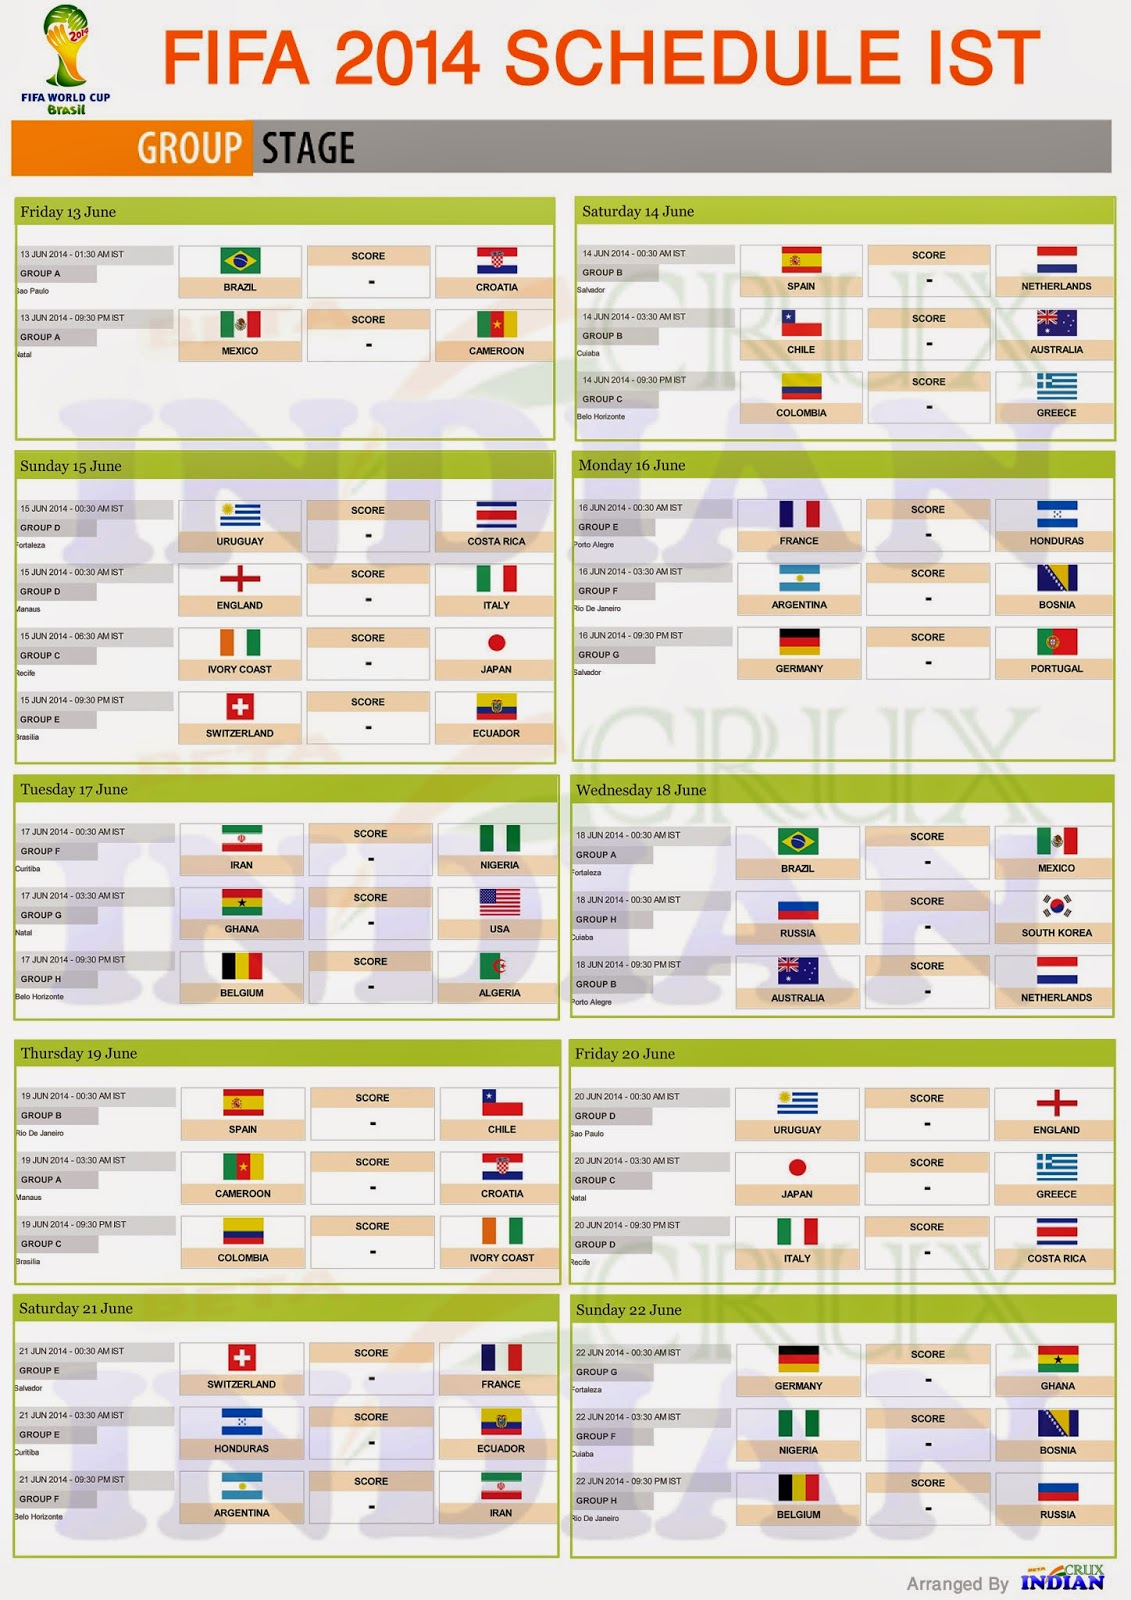 FIFA World Cup 2014 Complete Match Schedule in Indian Standard Time